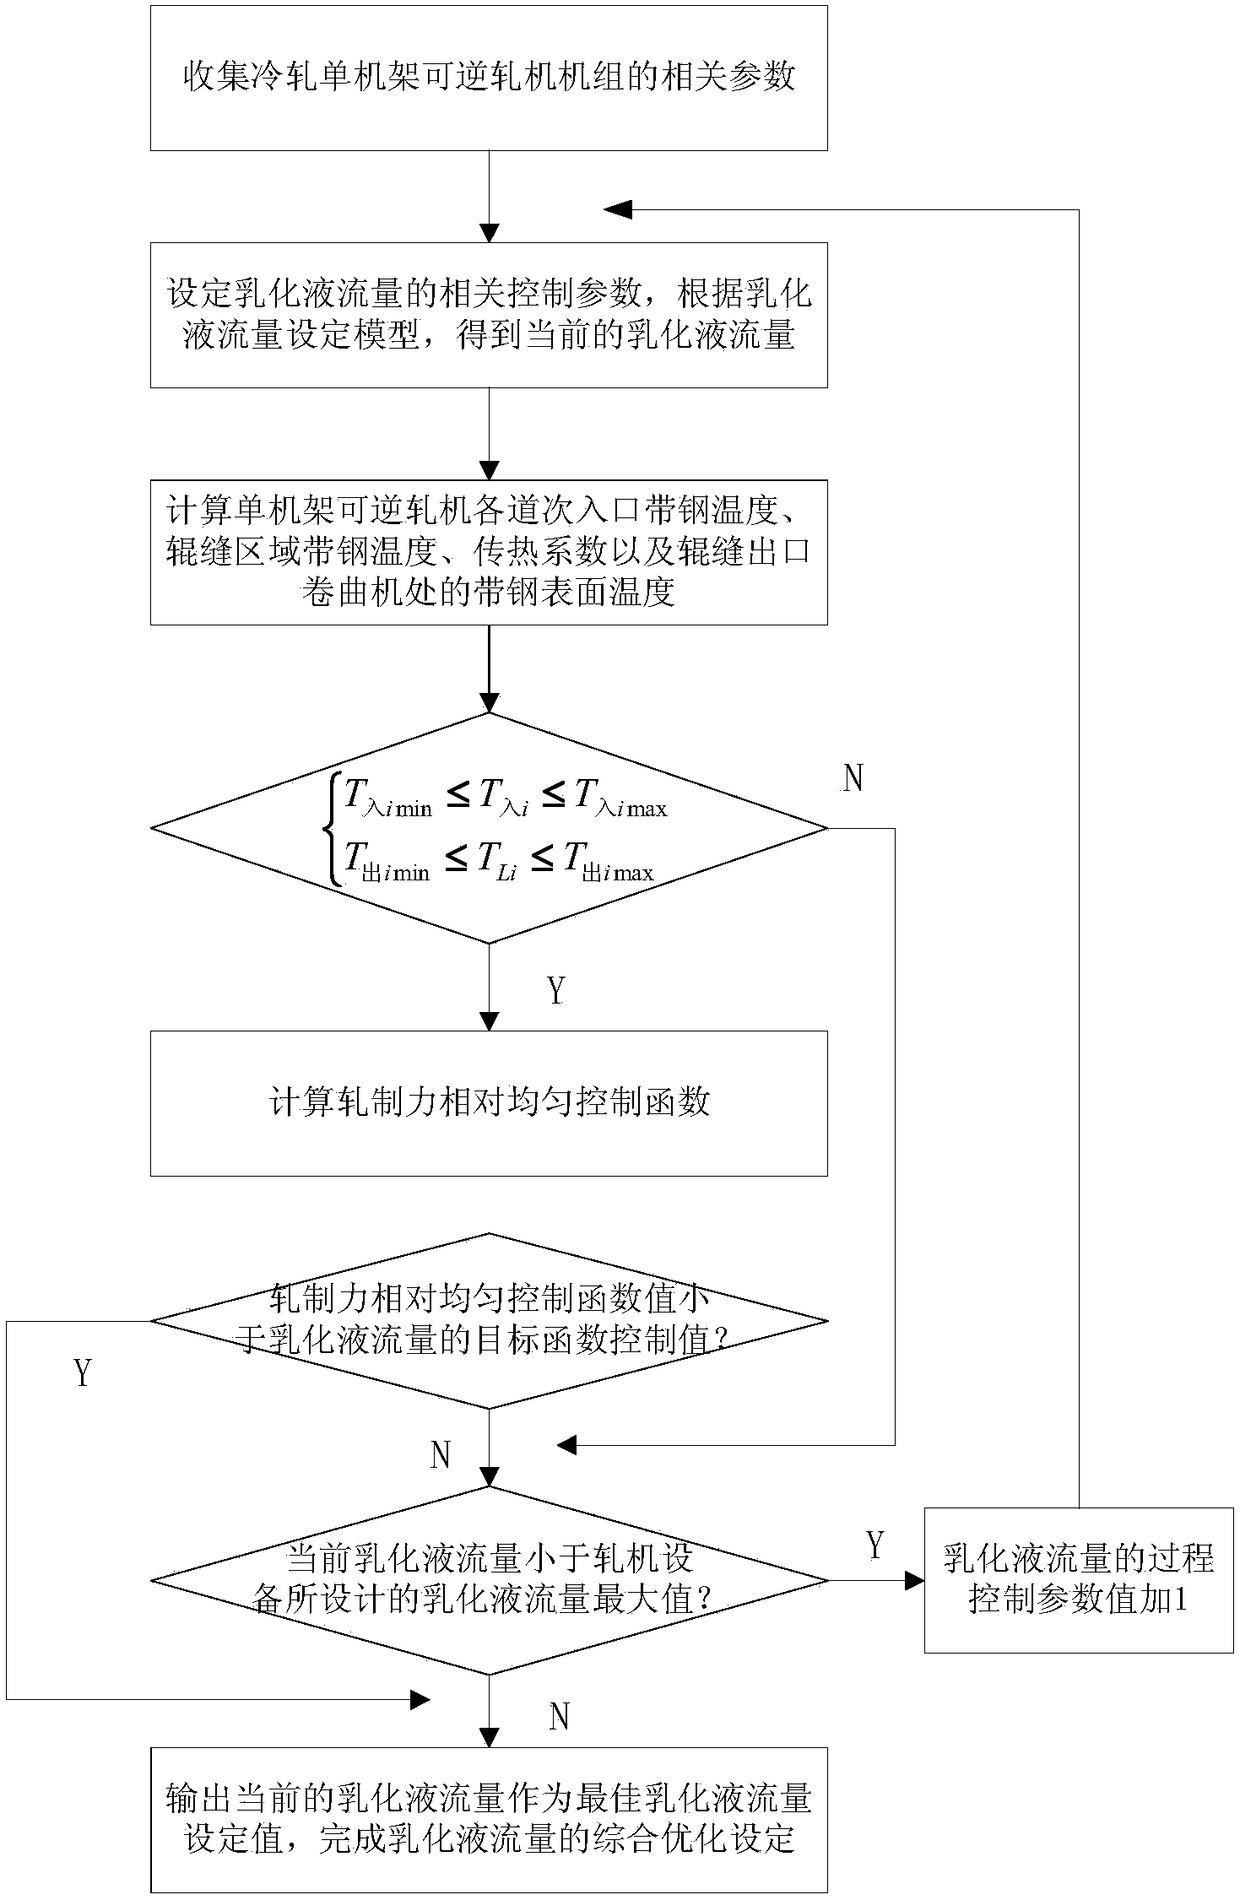 Technological lubrication system setting method for cold rolling single stand reversing mill